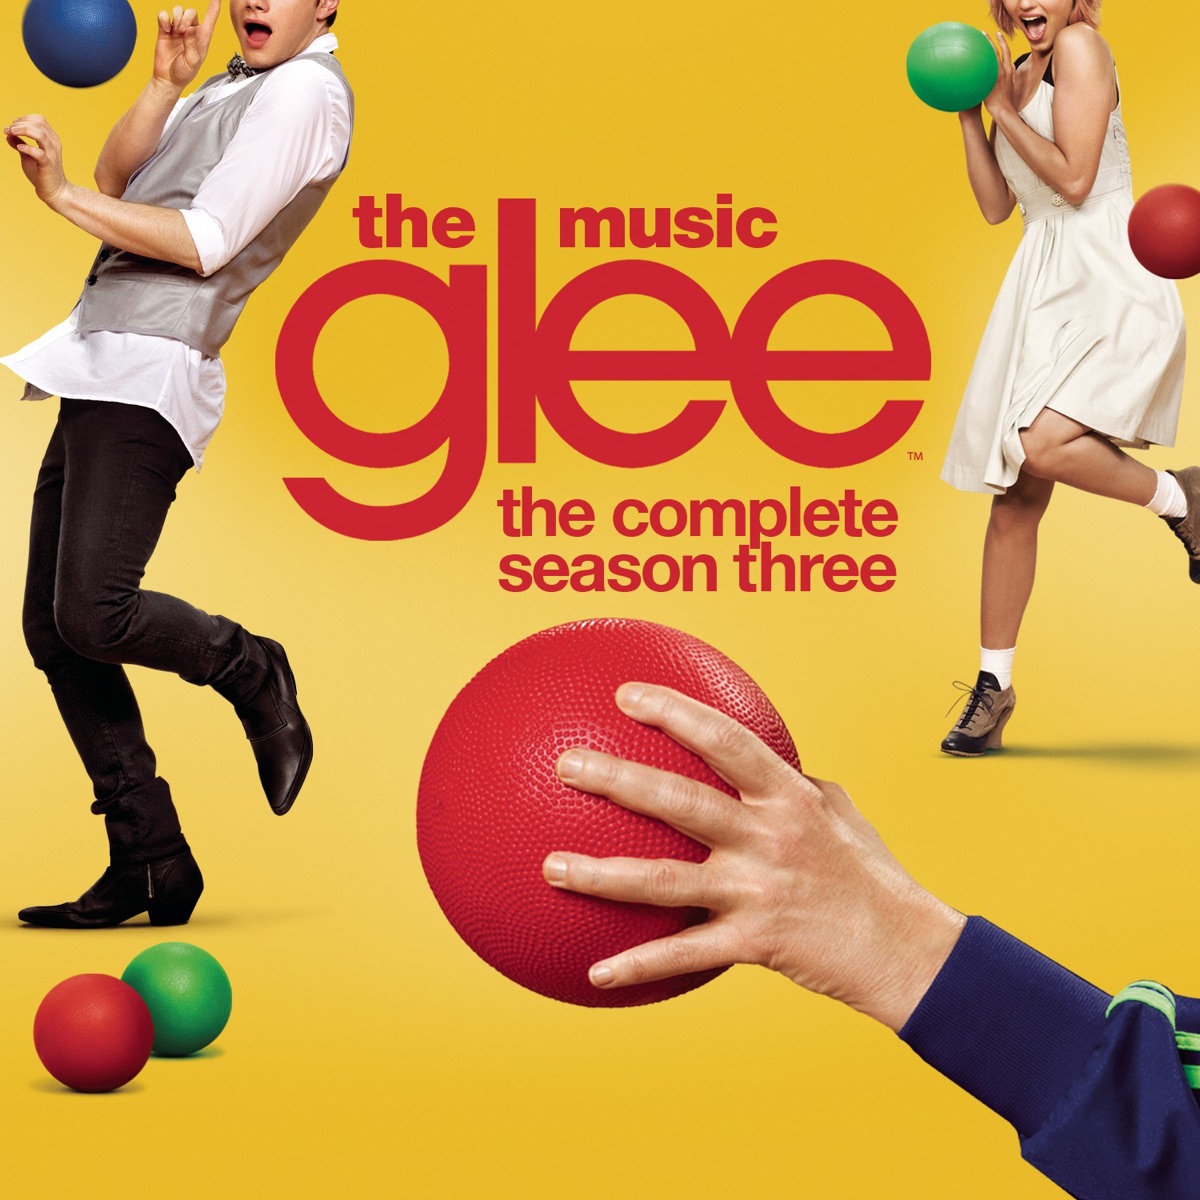 Glee: The Music, The Complete Season Two by Glee Cast on Apple Music